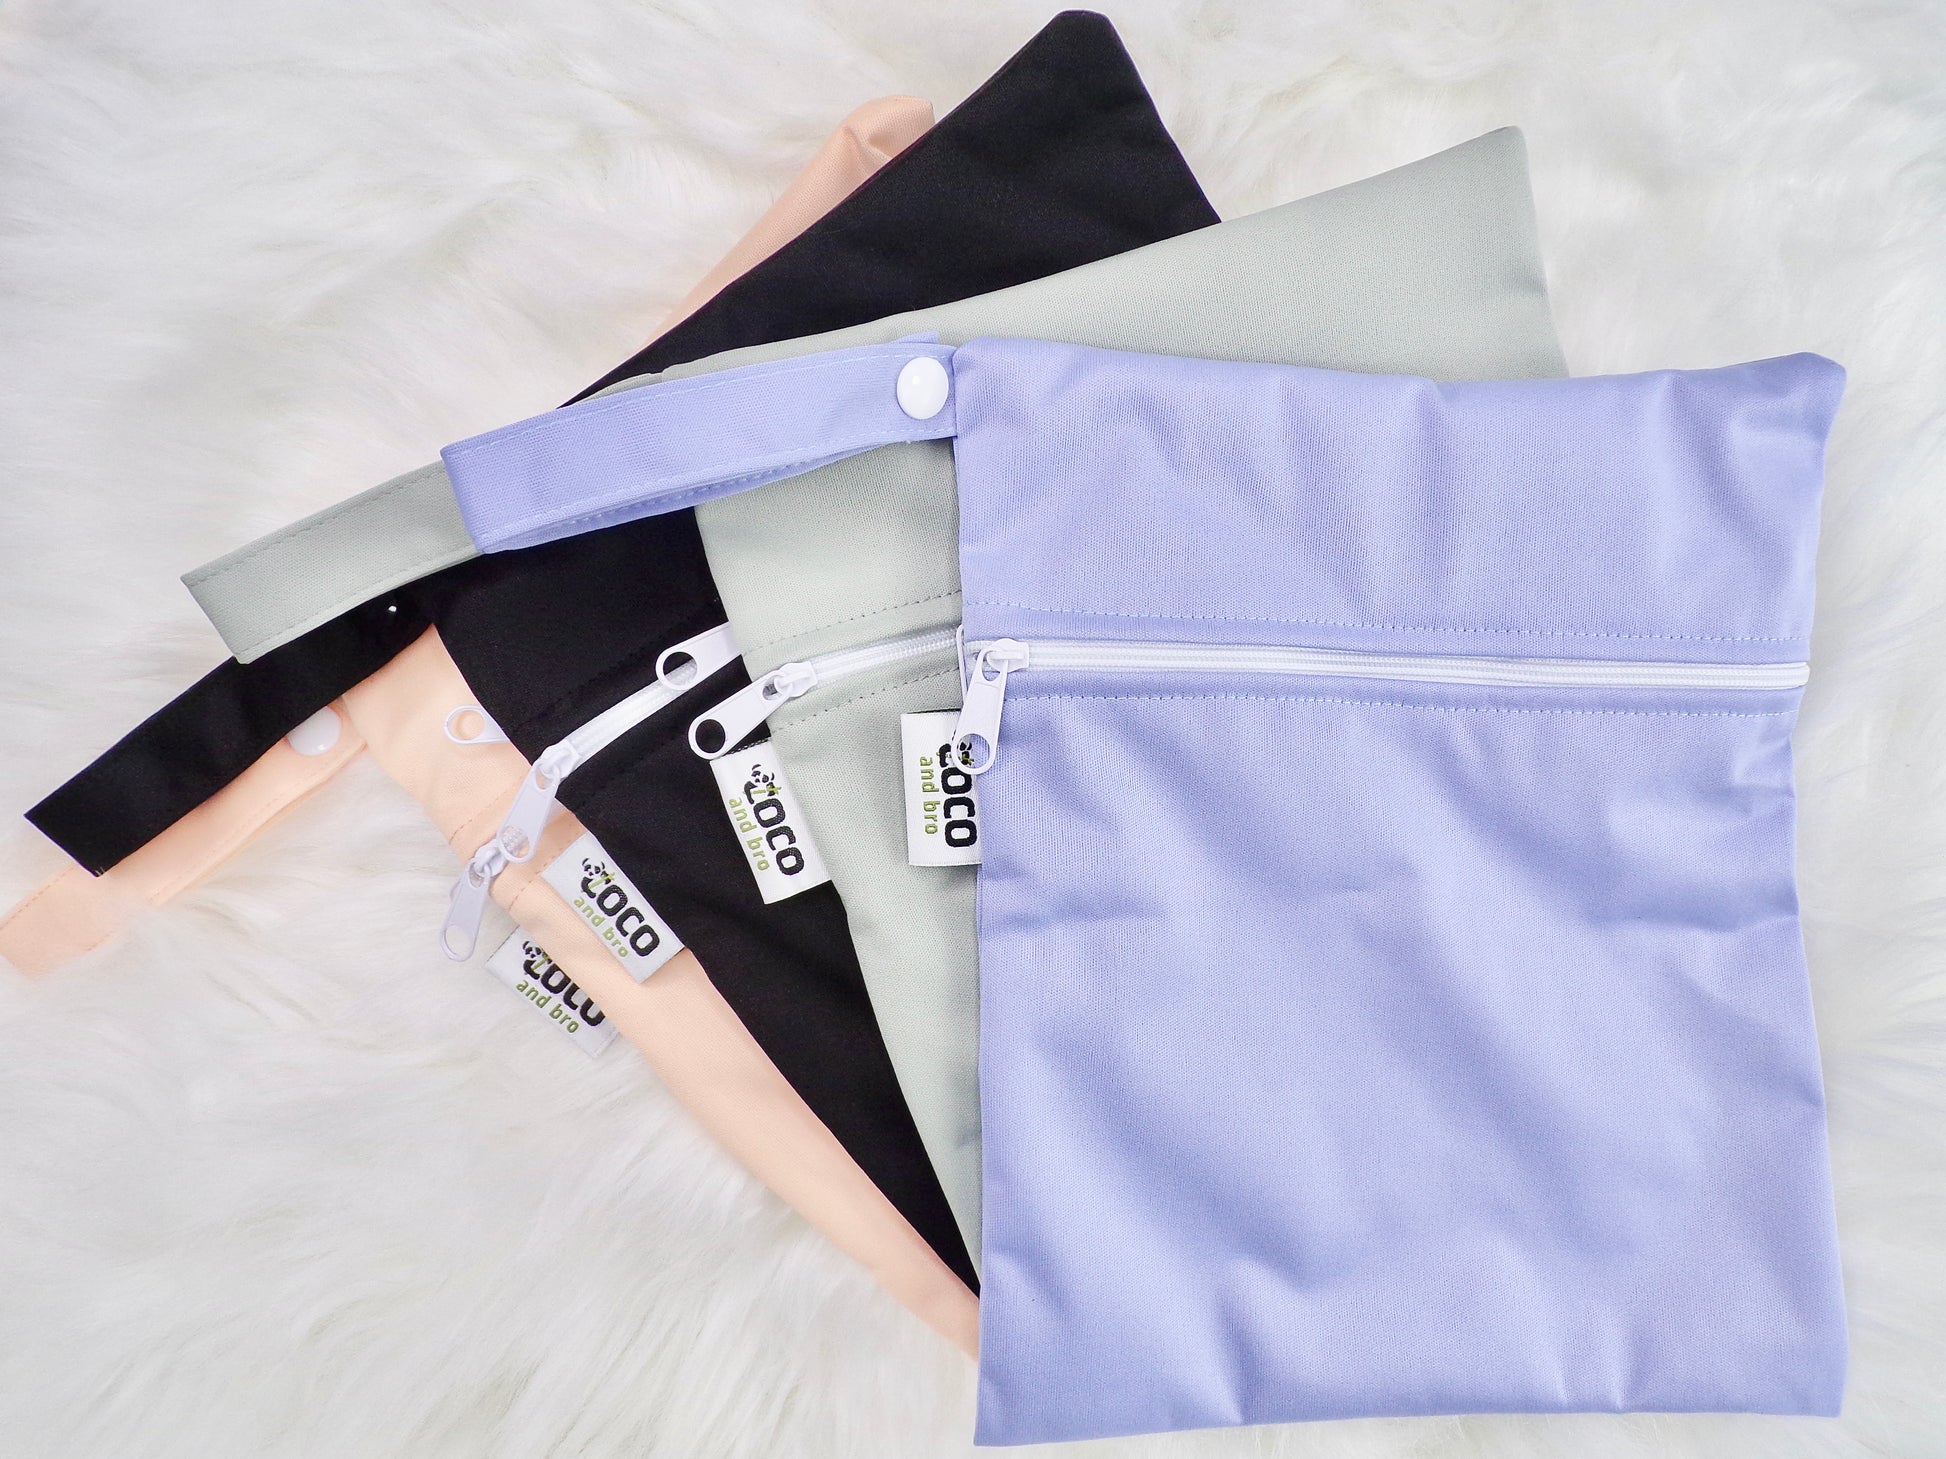 A selection of waterproof bags. The bags are made from bamboo, and are available in black, grey, purple and peachy pink.